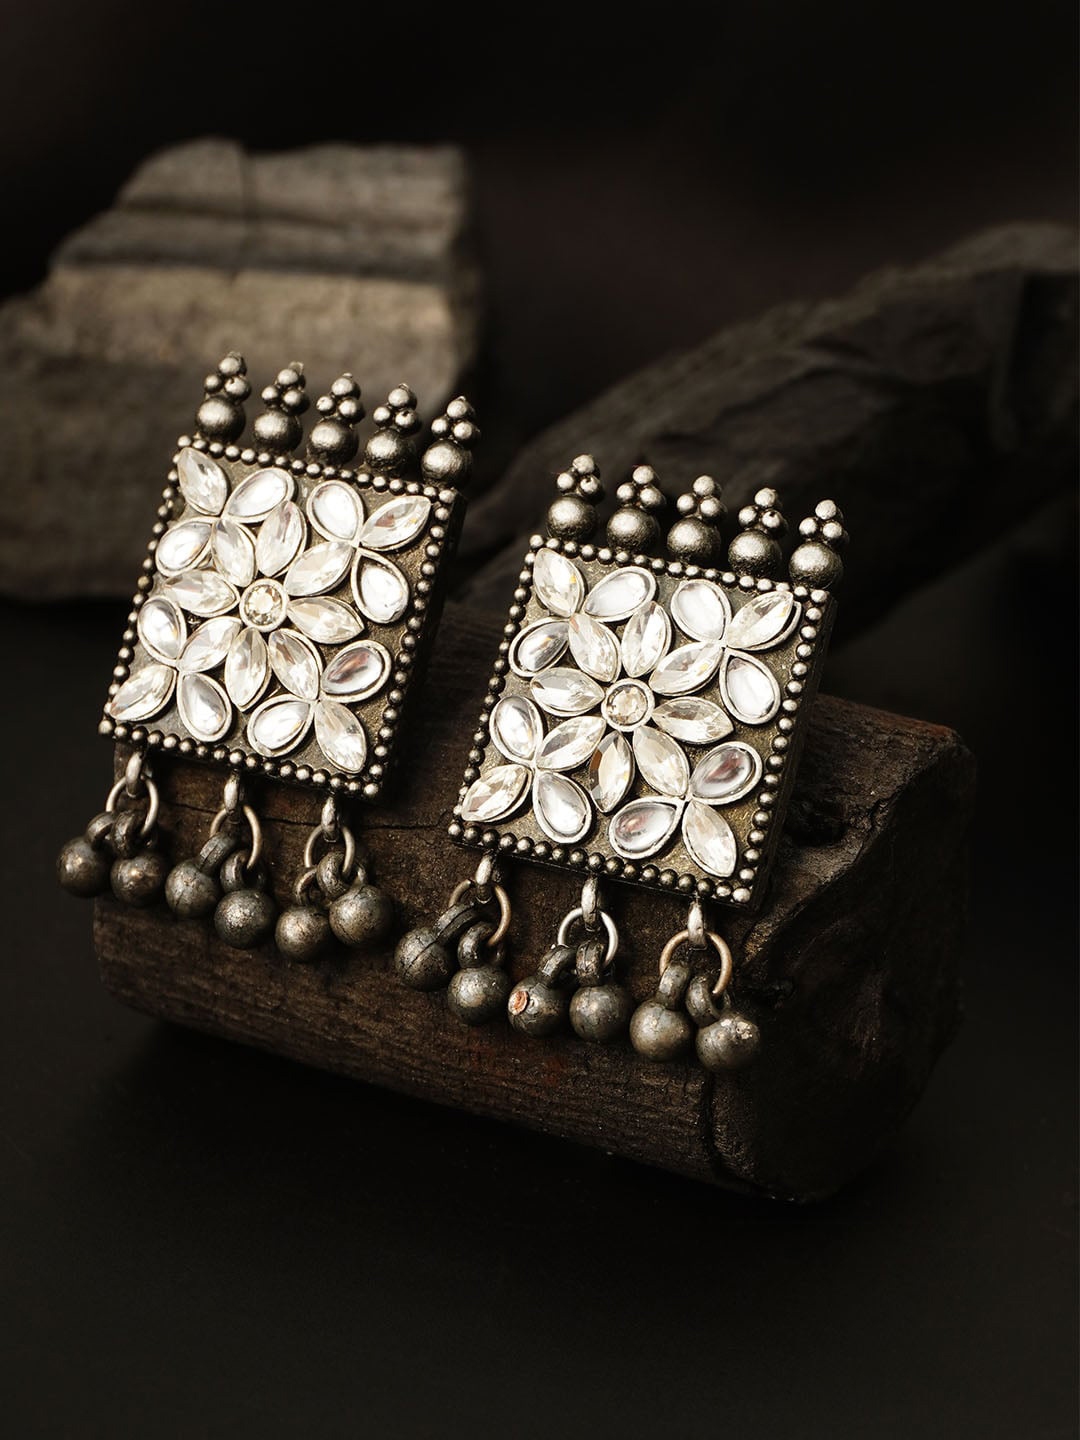 Buy Fresh Vibes Oxidised Silver Traditional Black Metal Unique Square Big  Jhumka Earrings for Women at Amazonin